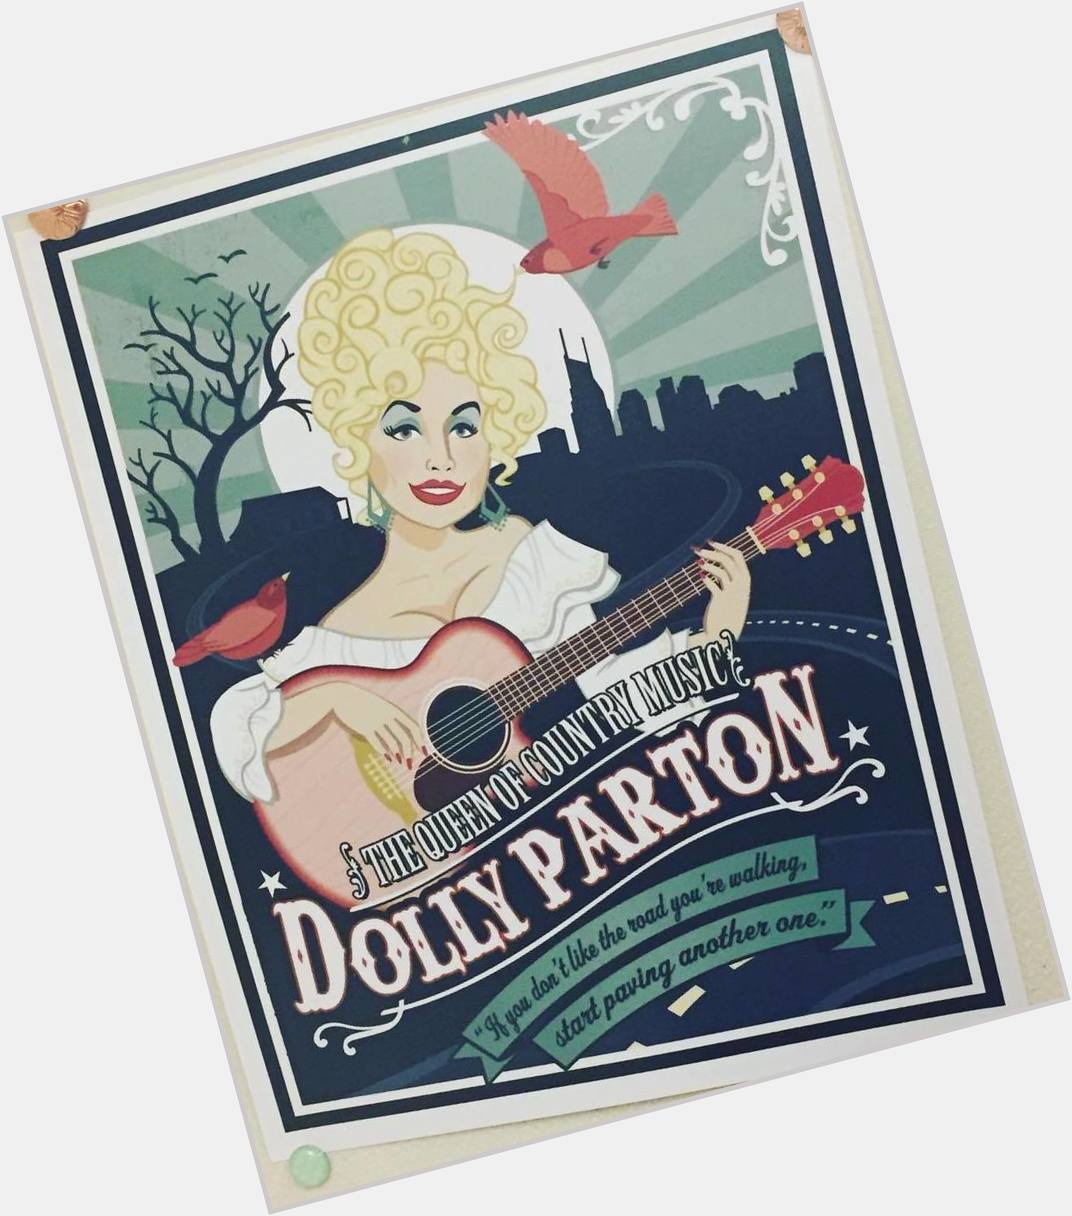 Happy Birthday Dolly Parton! I keep this poster by my desk to remind me to be strong and t 